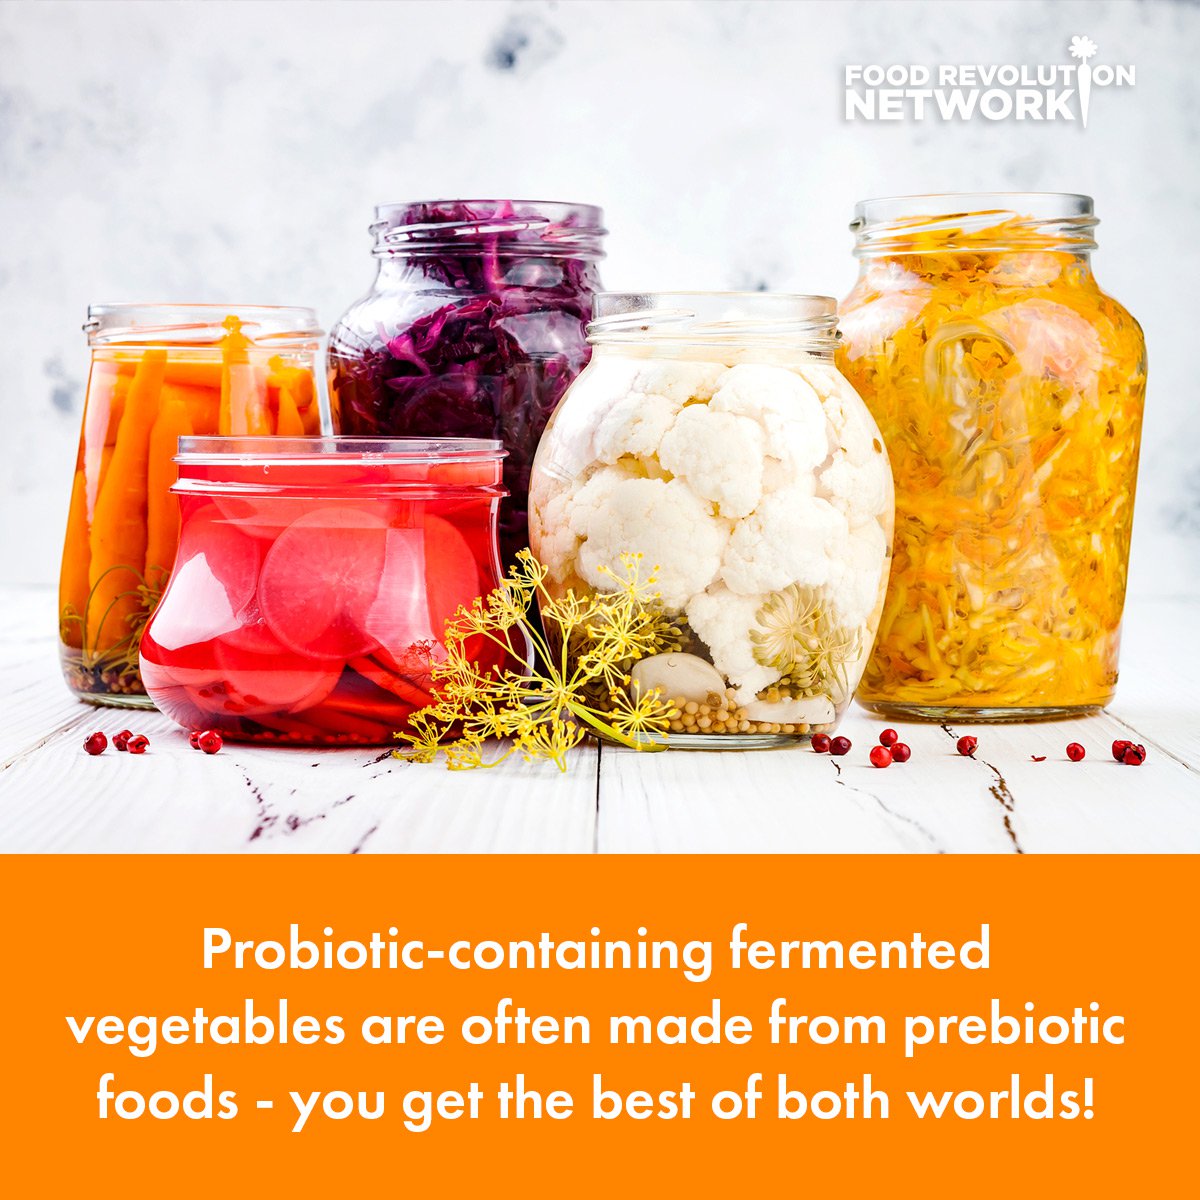 Probiotic-containing fermented vegetables are often made from prebiotic foods - you get the best of both worlds!